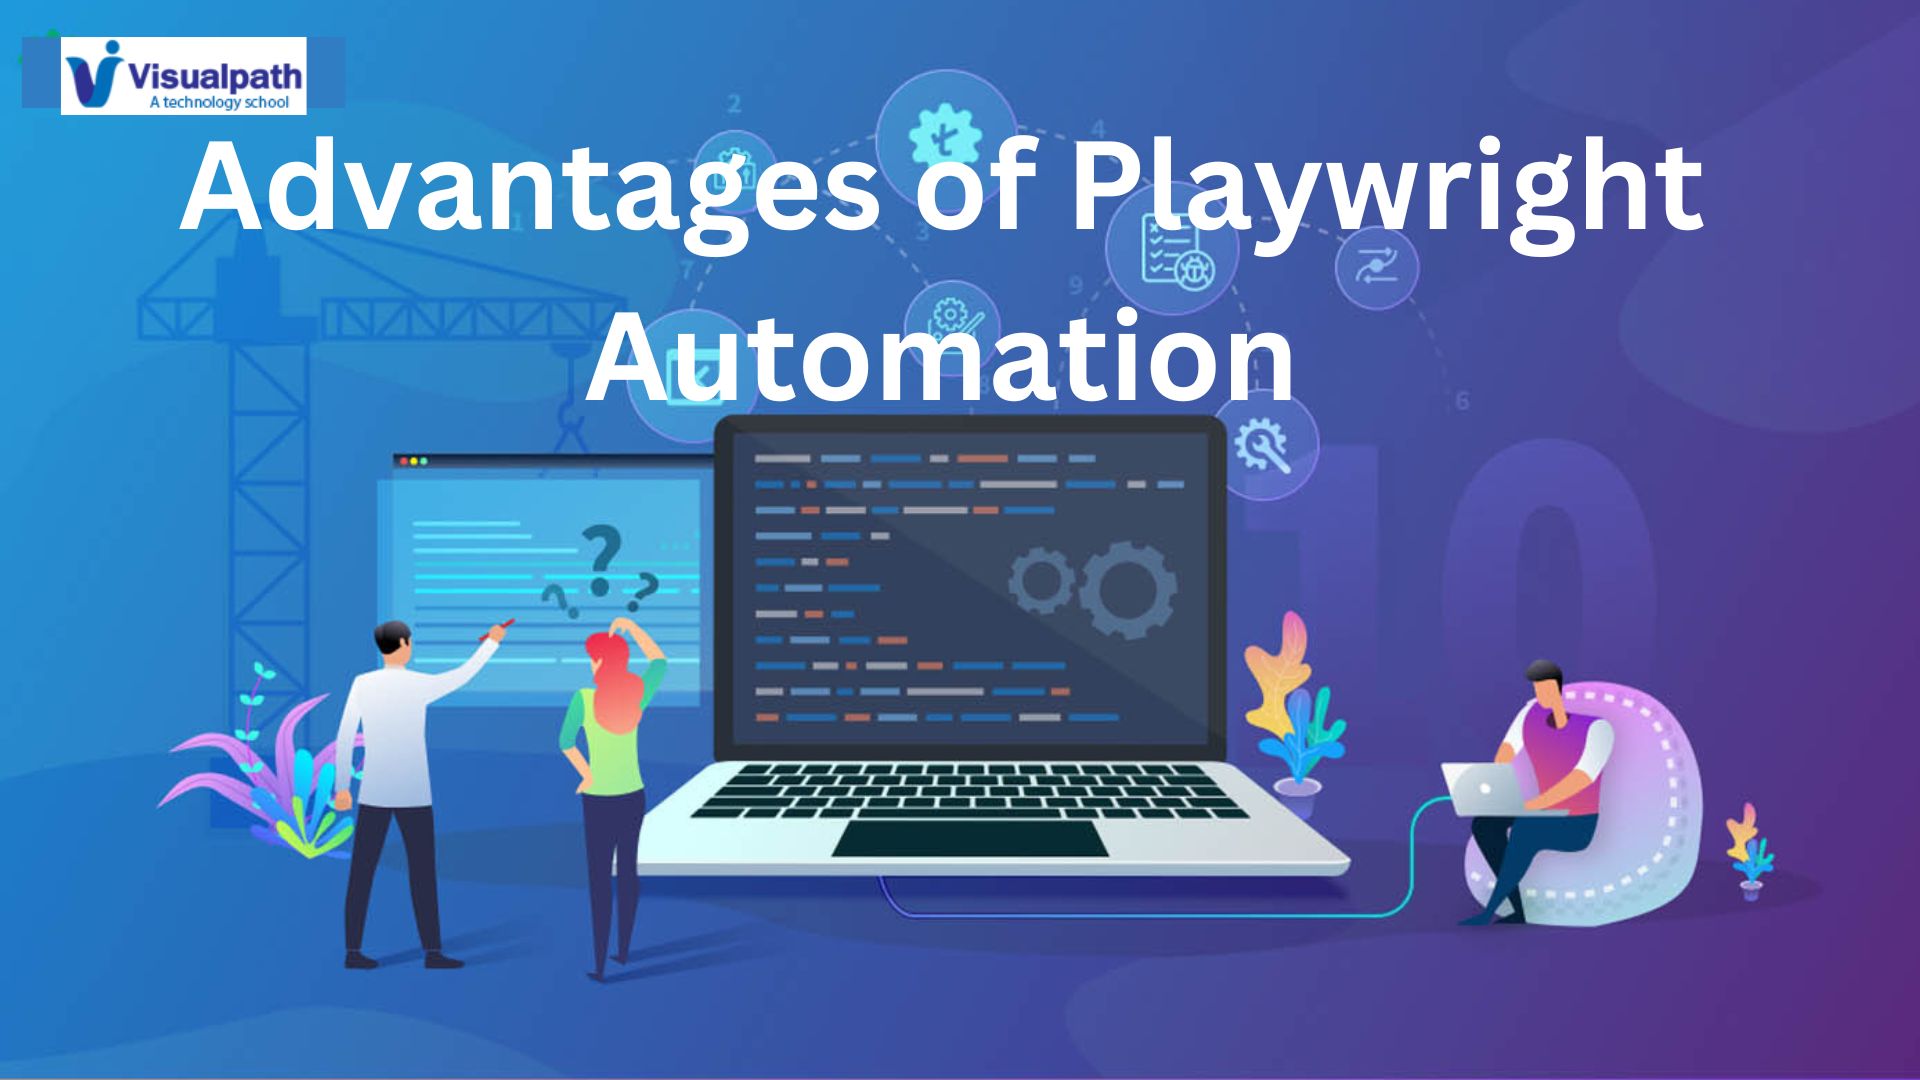 The Advantages of Playwright Automation